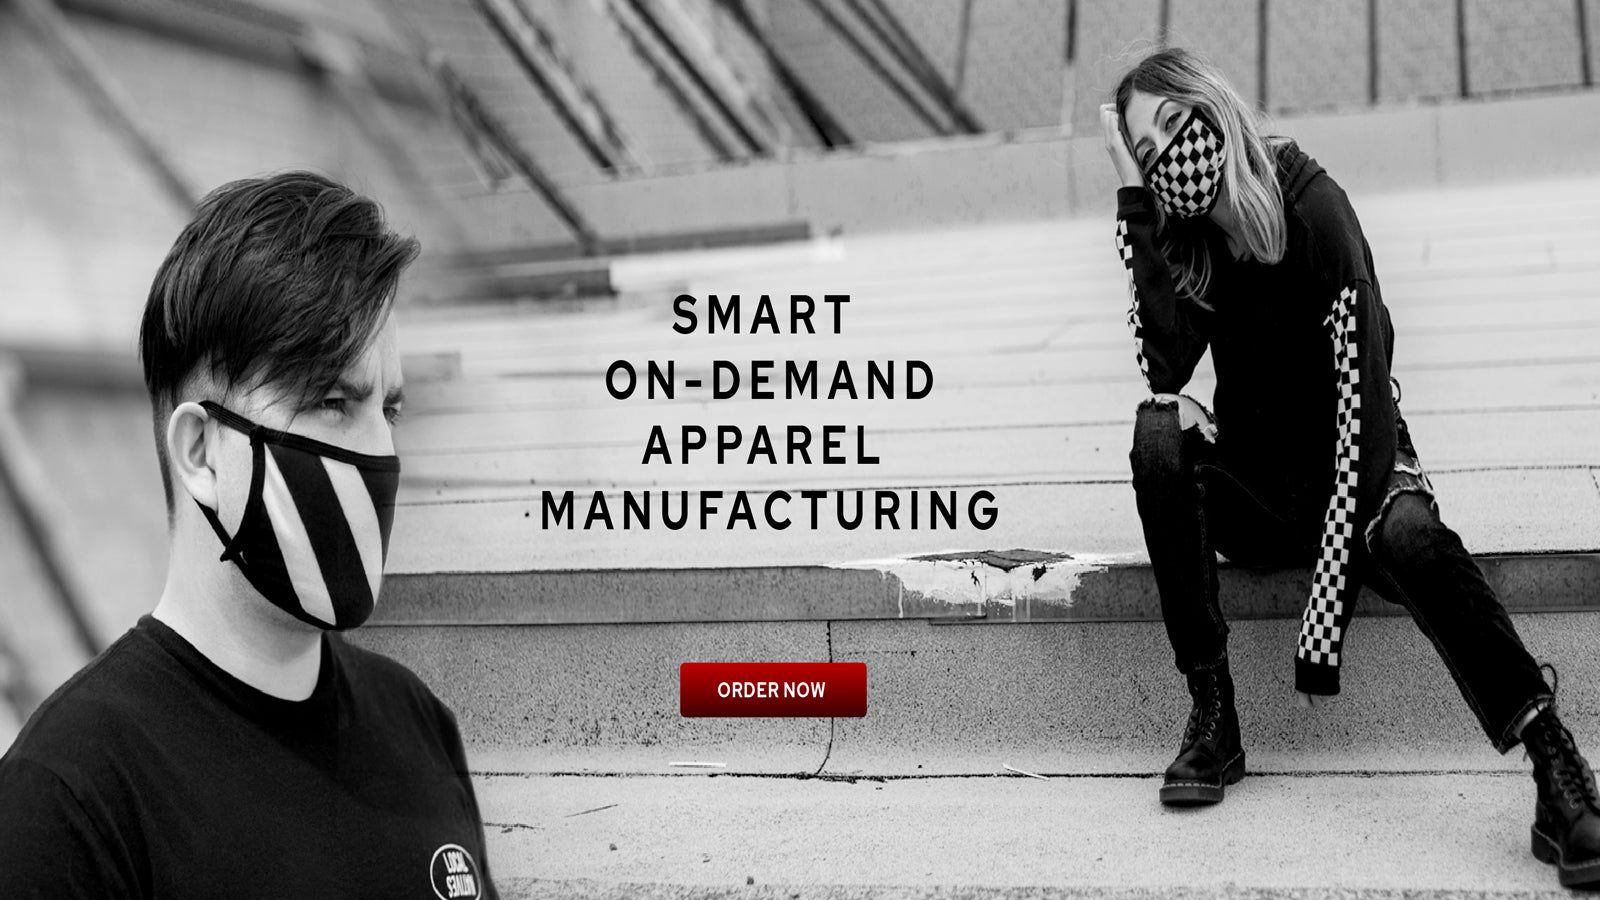 Smart On-Demand Apparel Manufacturing